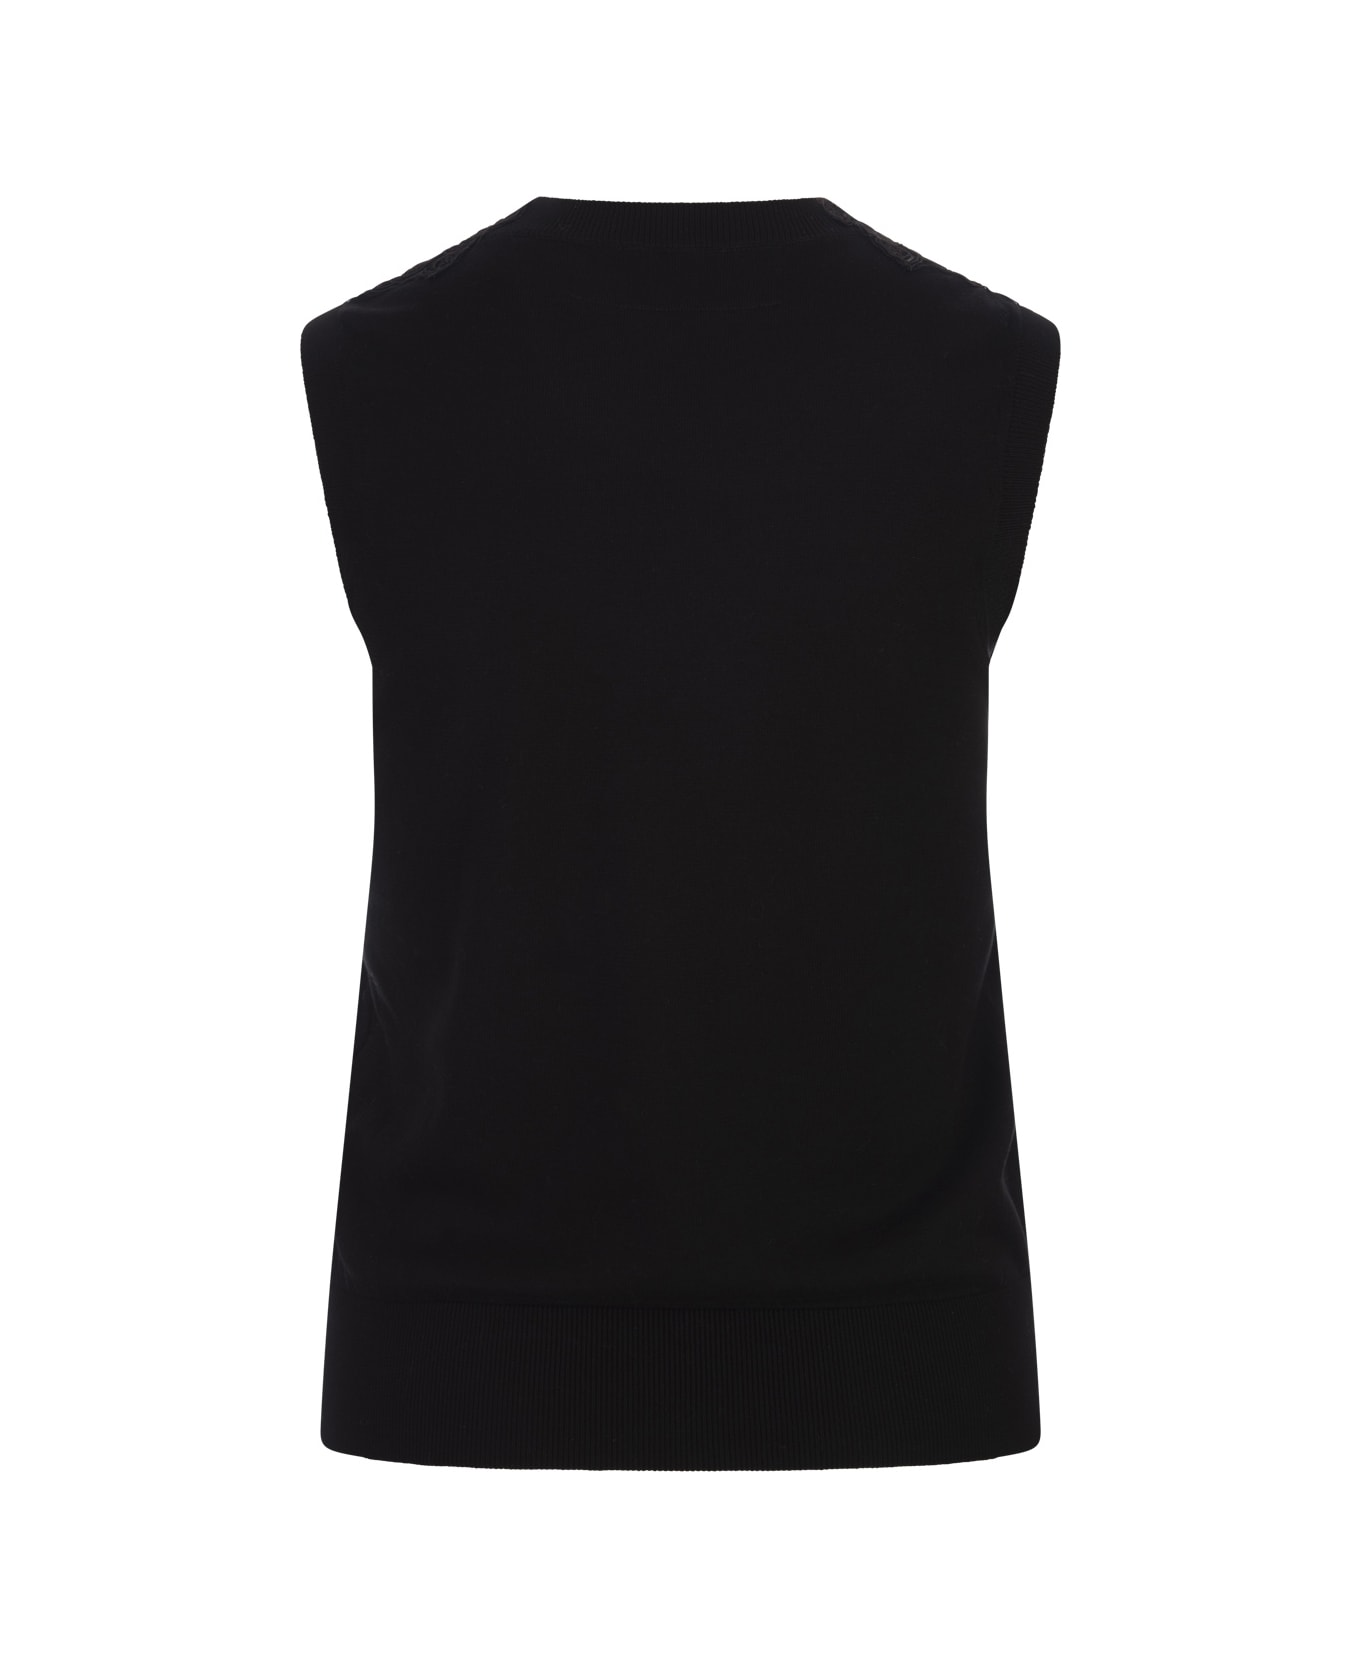 Ermanno Scervino Black Knitted Sleeveless Top With Lace - Black